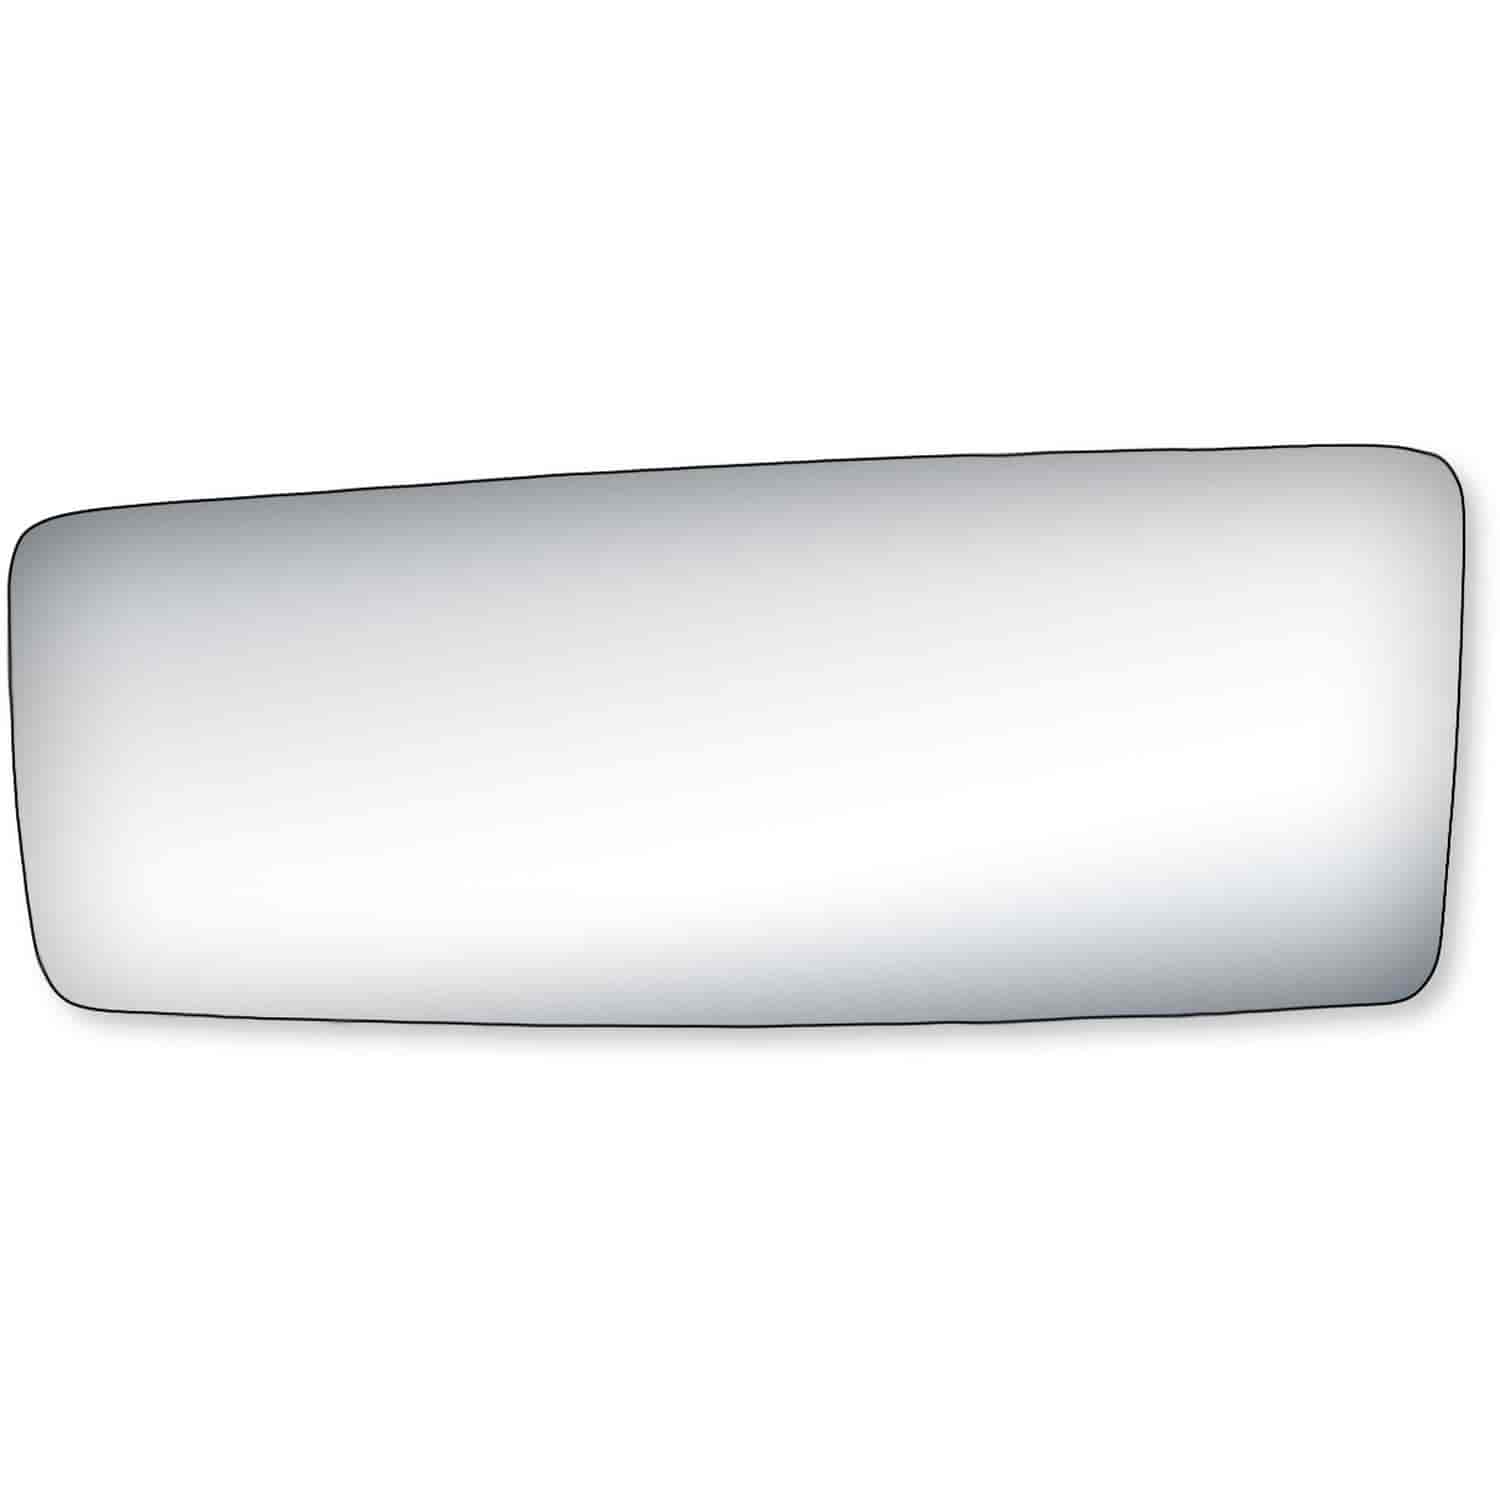 Replacement Glass for 04-12 F150 towing mirror bottom lens the glass measures 2 15/16 tall by 7 9/16